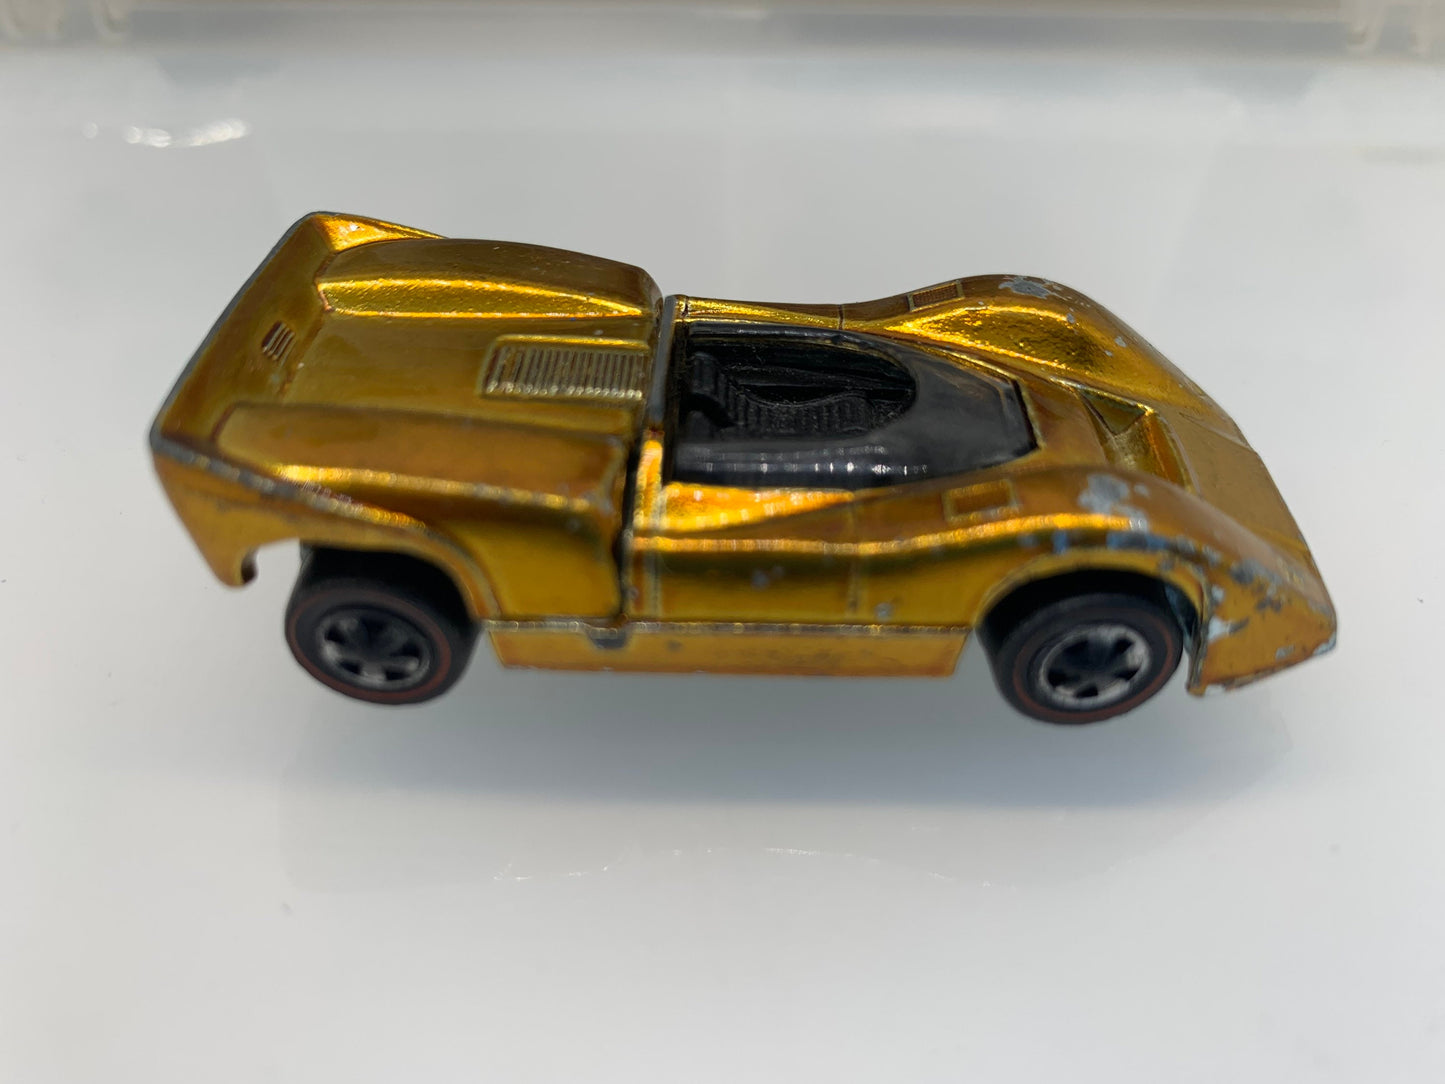 1969 Redline McLaren M6A Gold Hot Wheels Collectable Scale Model Miniature Toy Car Perfect Birthday Gift